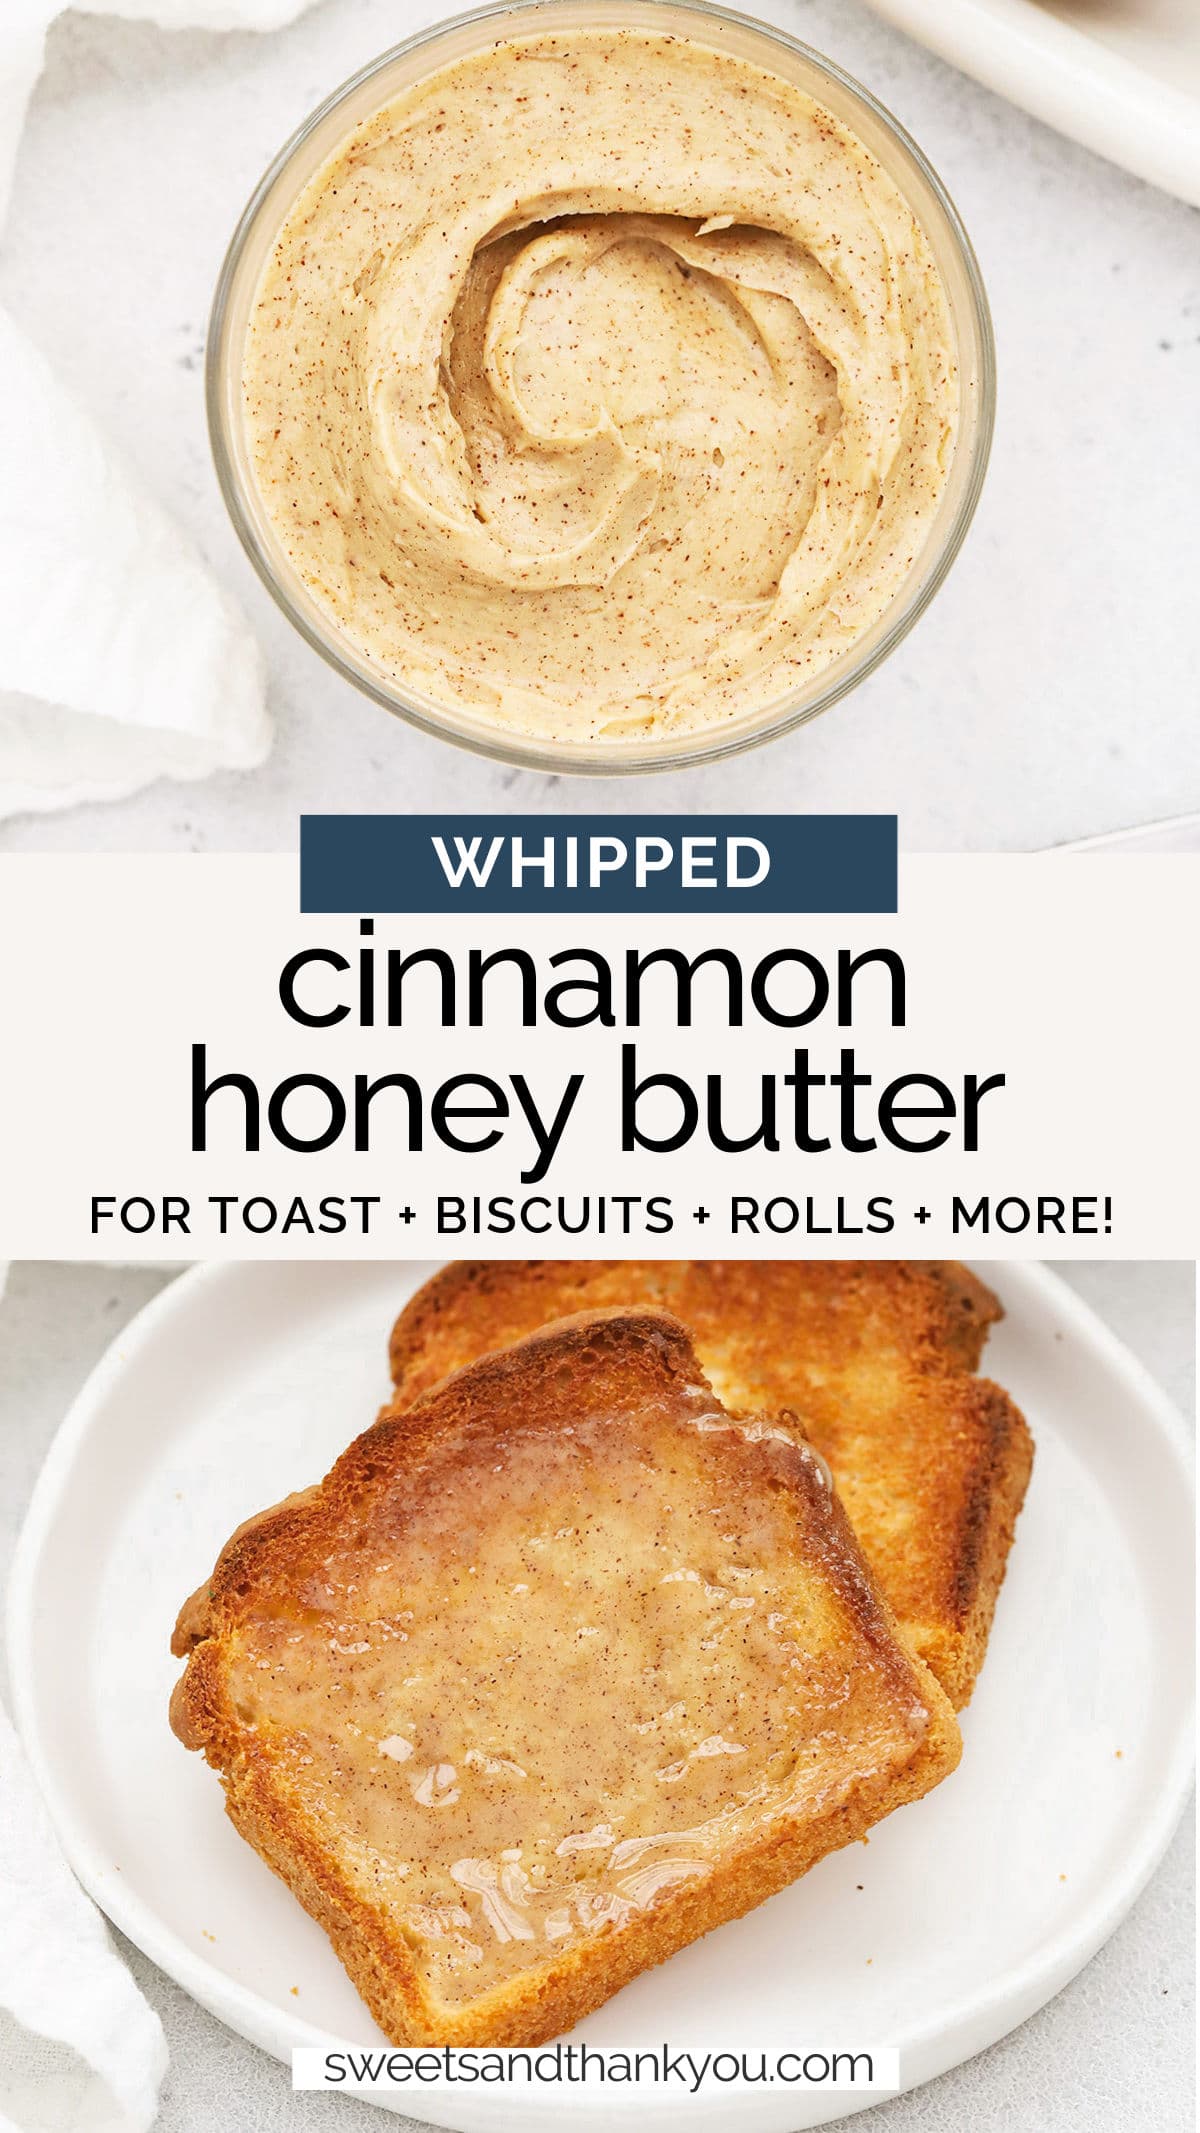 Whipped Cinnamon Butter - This easy cinnamon honey butter recipe adds gorgeous flavor to biscuits, rolls, toast, sweet potatoes & more! // Whipped Honey Butter Recipe // Texas Roadhouse Cinnamon Butter // Texas Roadhouse Cinnamon Honey Butter #cinnamonbutter #honeybutter #thanksgiving #butter